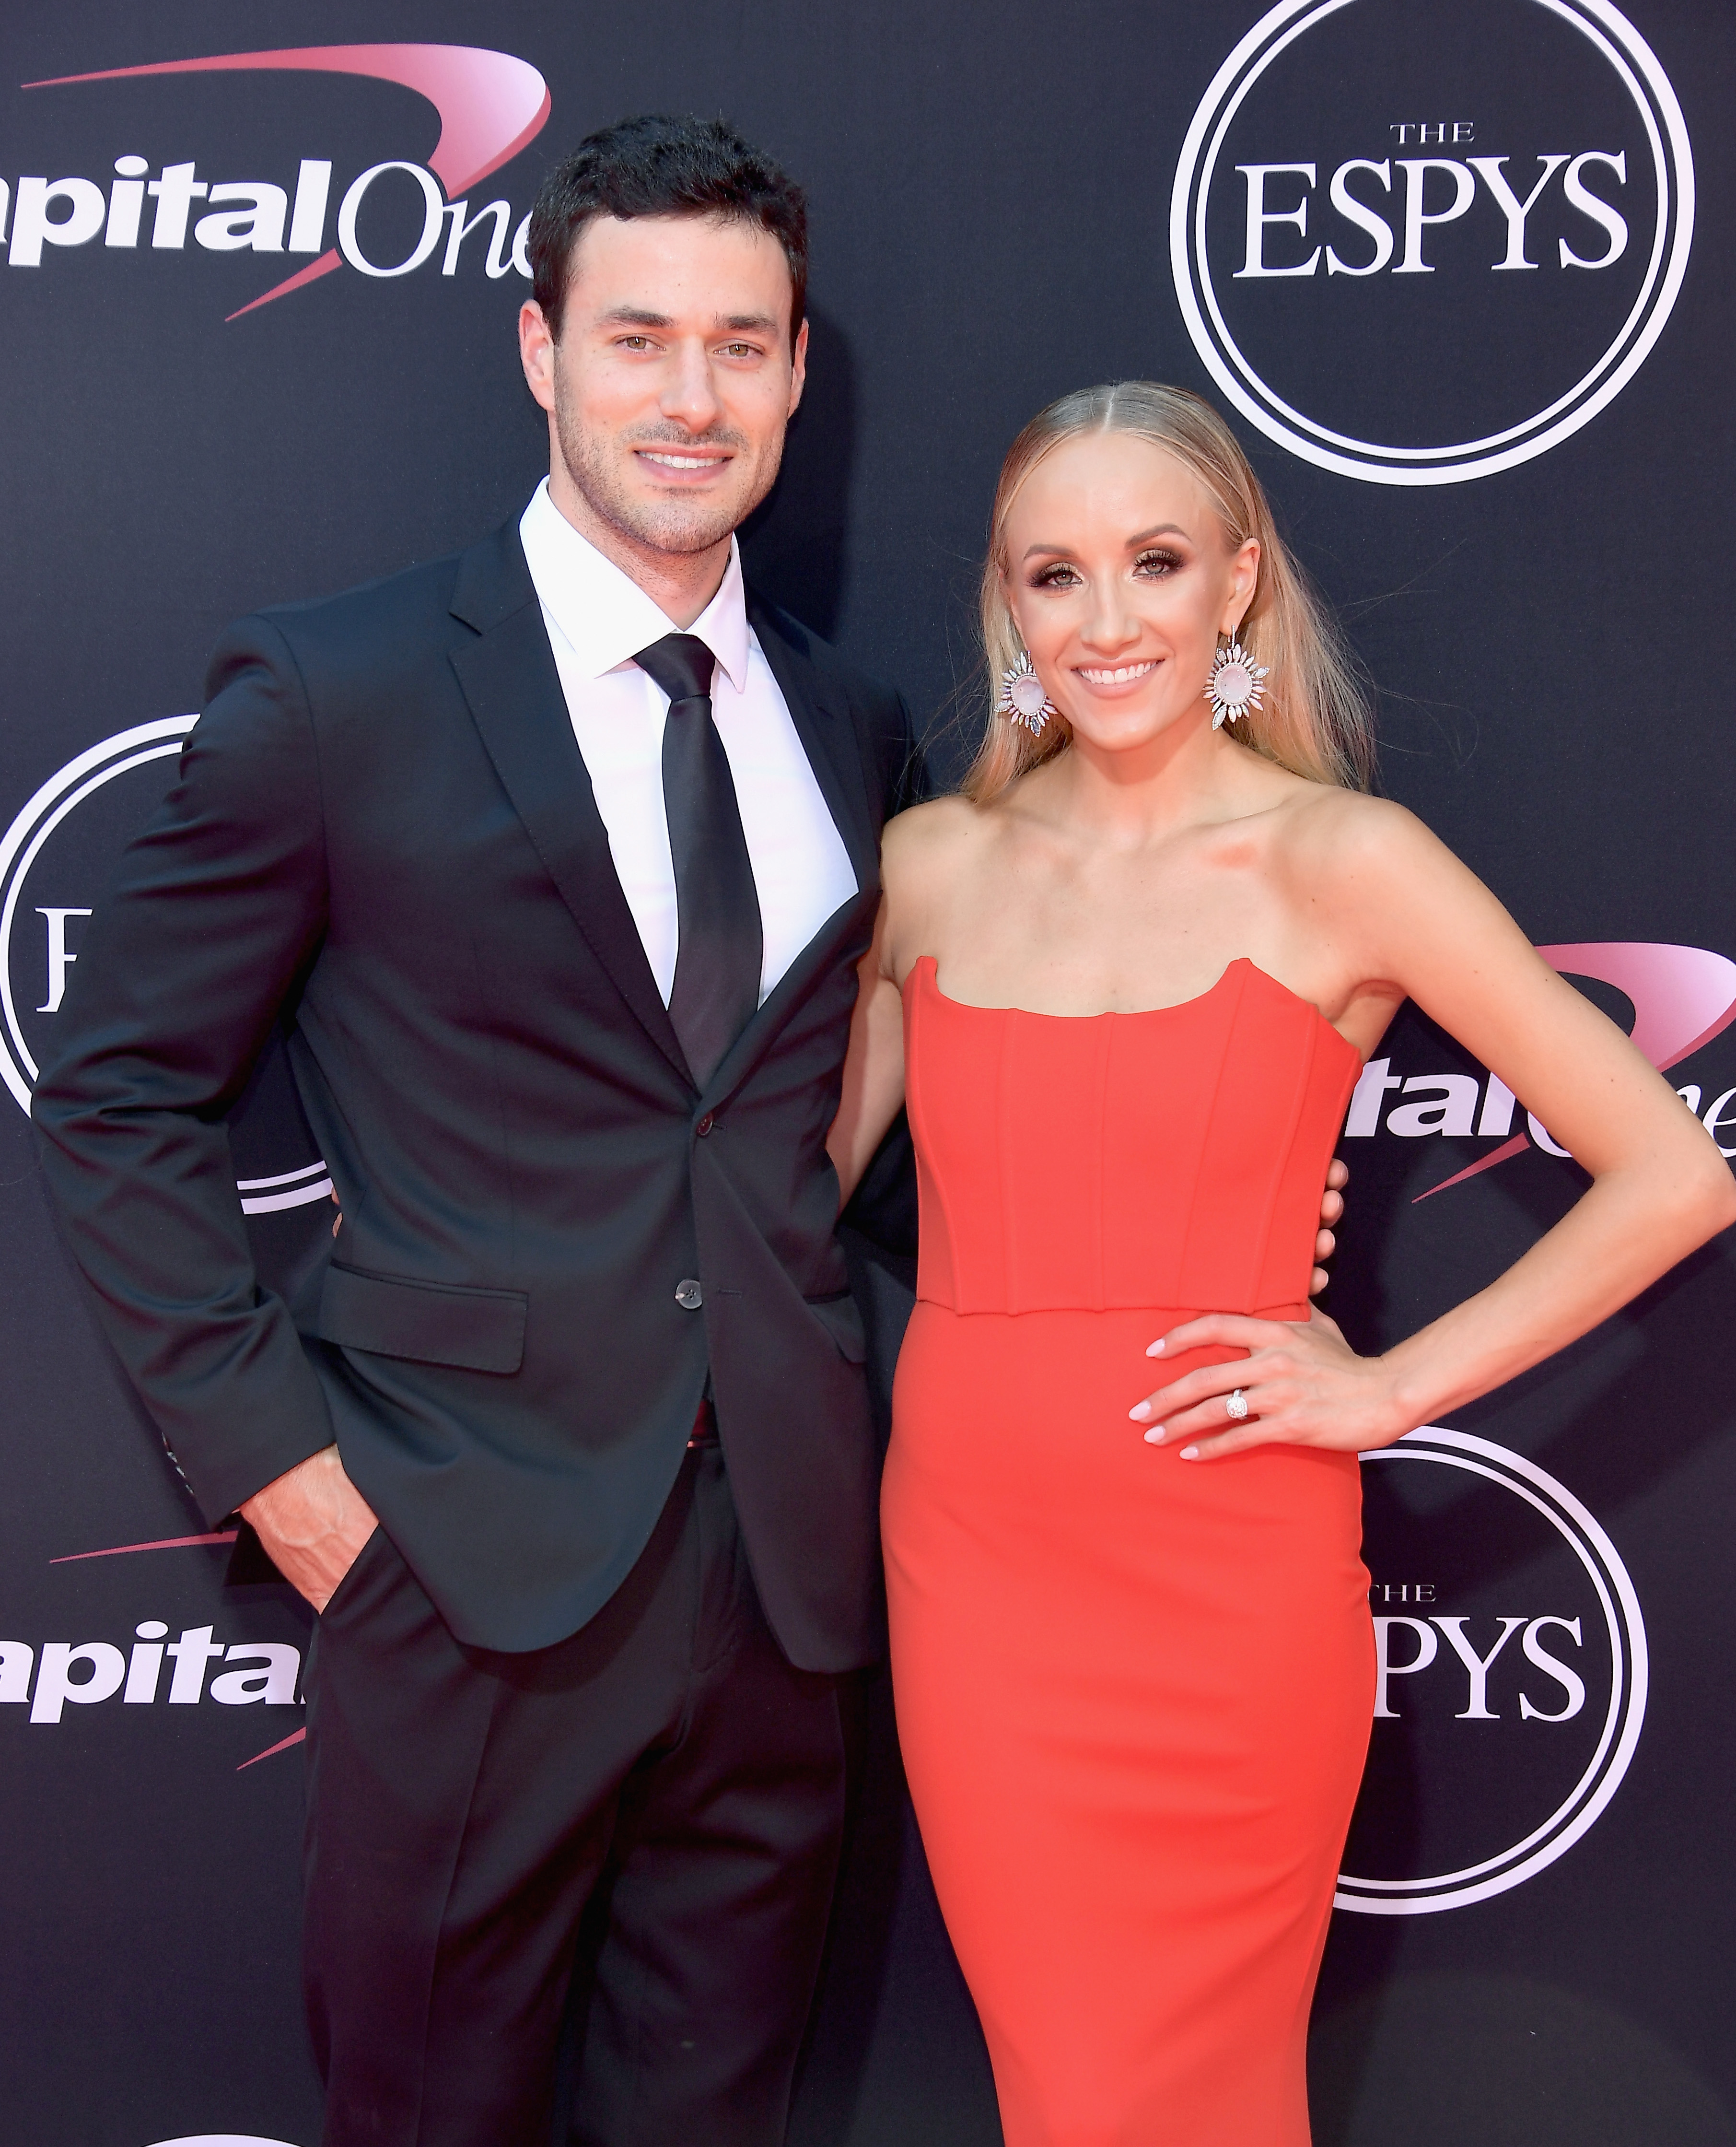 Matt Lombardi and Nastia Liukin attend The 2017 ESPYS at Microsoft Theater on July 12, 2017, in Los Angeles, California. | Source: Getty Images